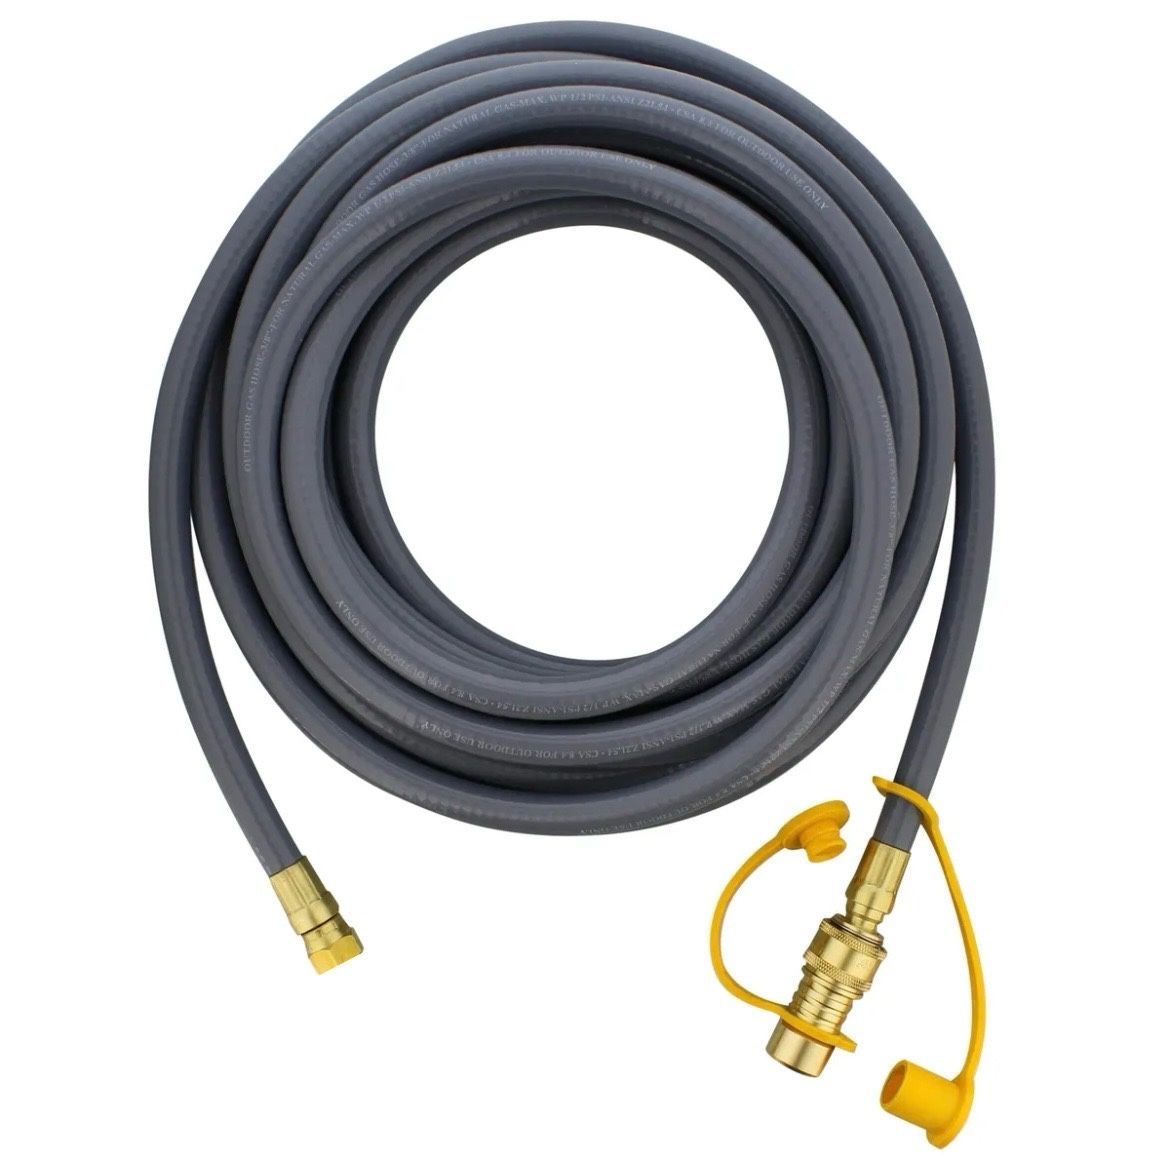 CALPOSE 15 Feet 3/8 Inch ID Natural Gas Grill Hose with Quick Connect Fittings